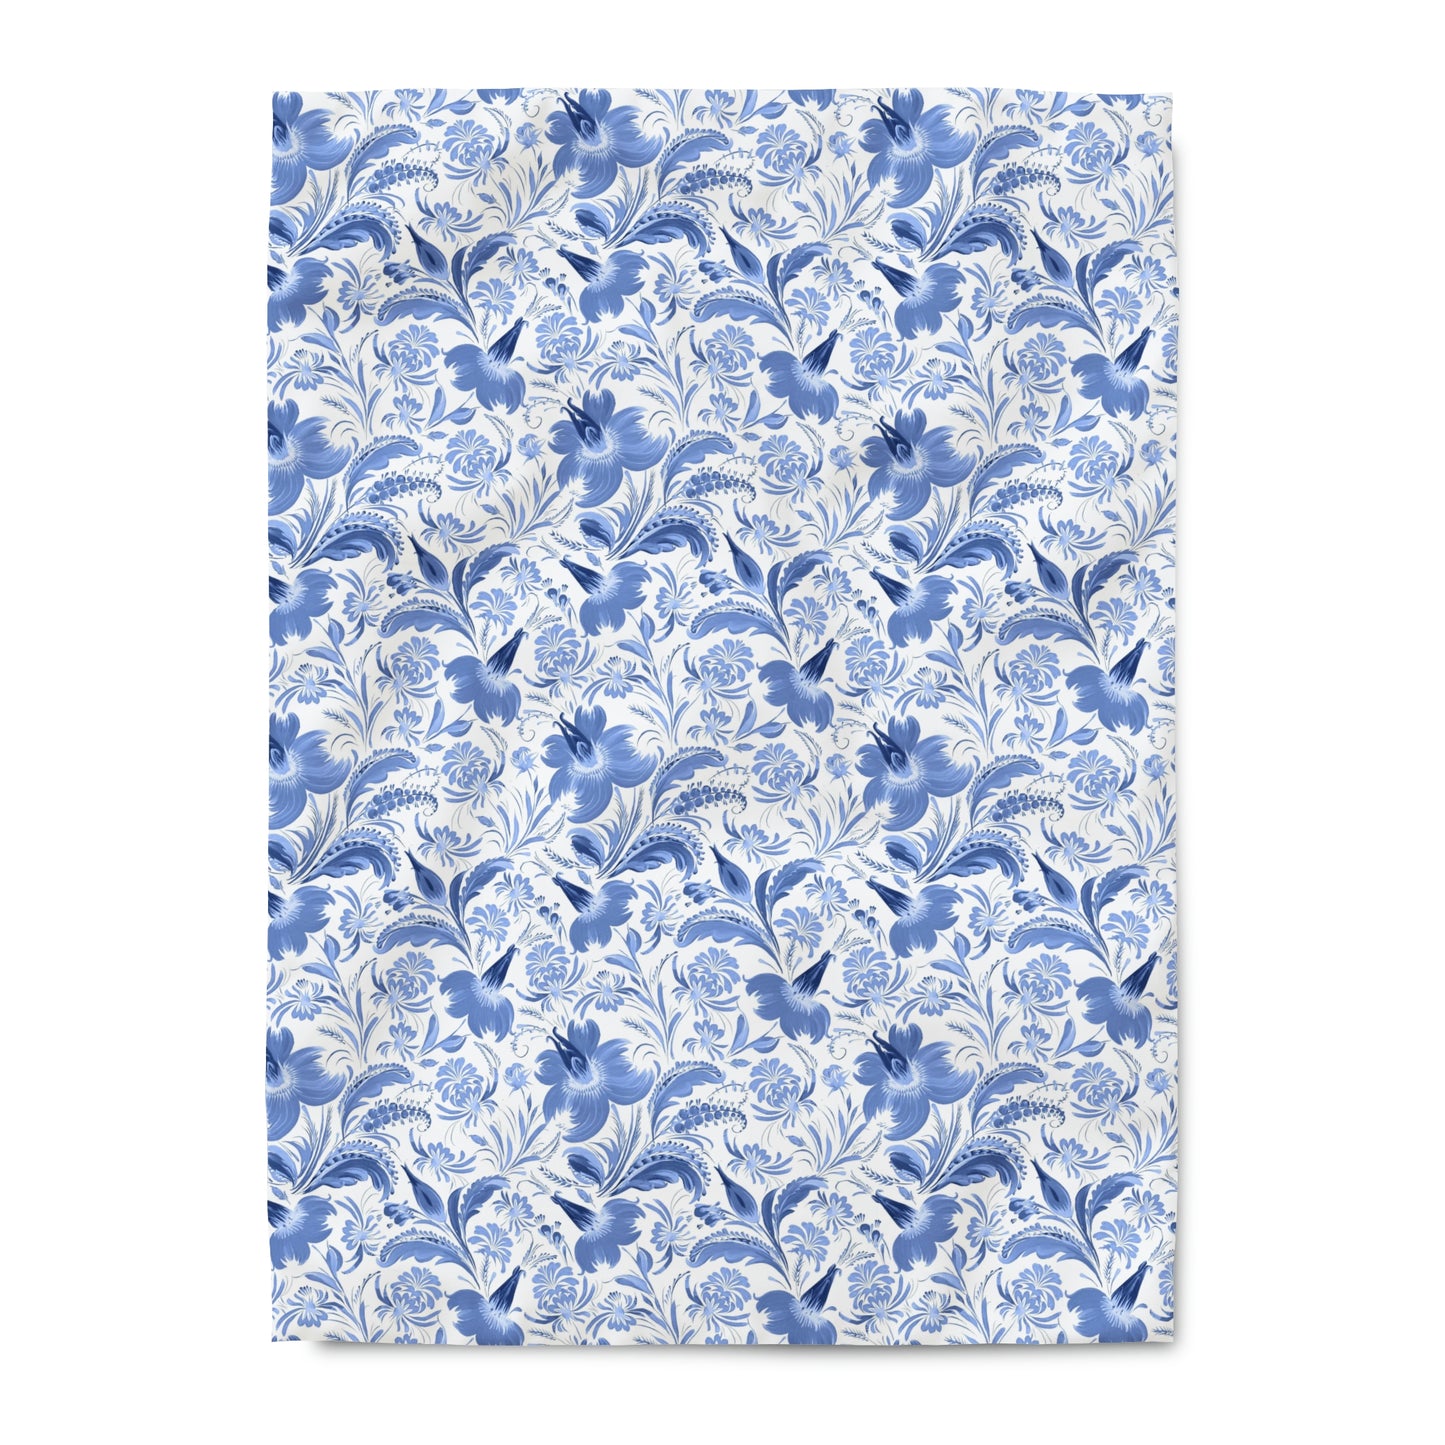 Blue Floral paisley Pattern Duvet Cover lying on a bed, microfiber duvet cover bedroom accent